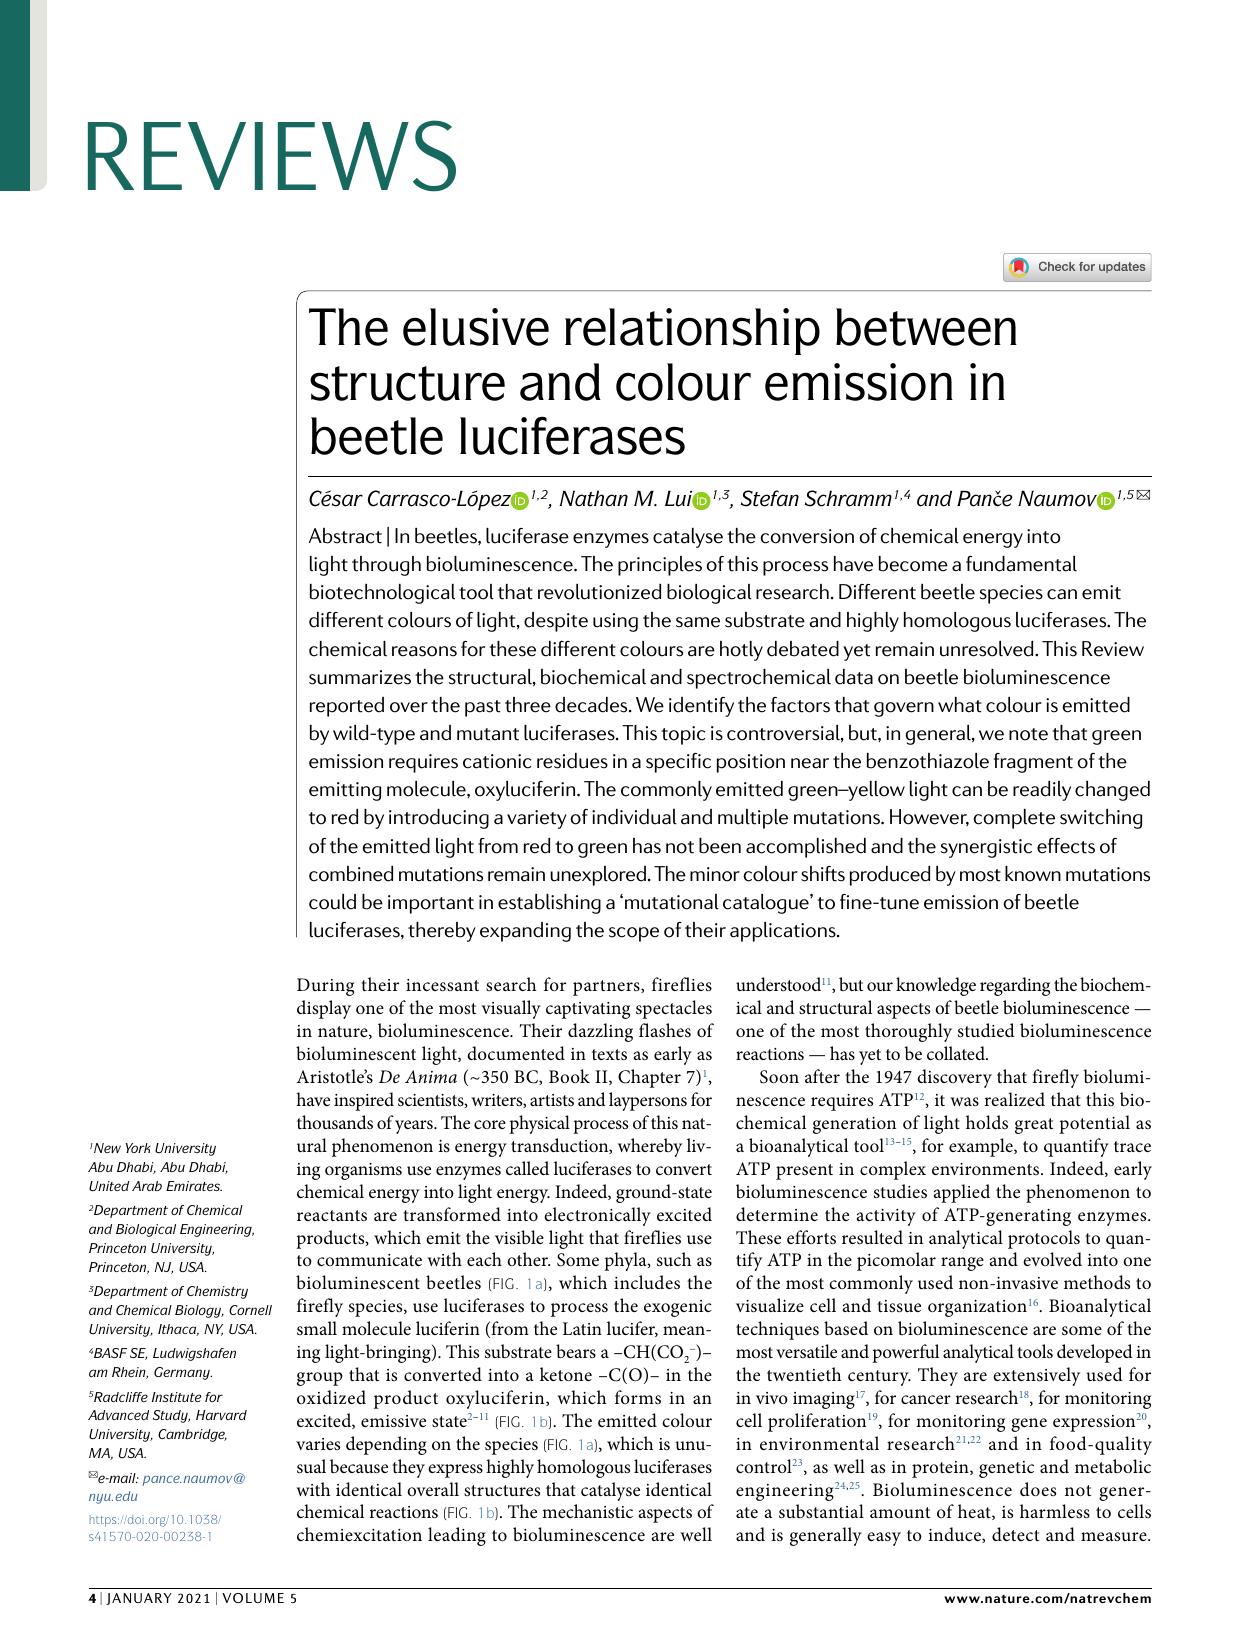 The elusive relationship between structure and colour emission in beetle luciferases by César Carrasco-López & Nathan M. Lui & Stefan Schramm & Panče Naumov